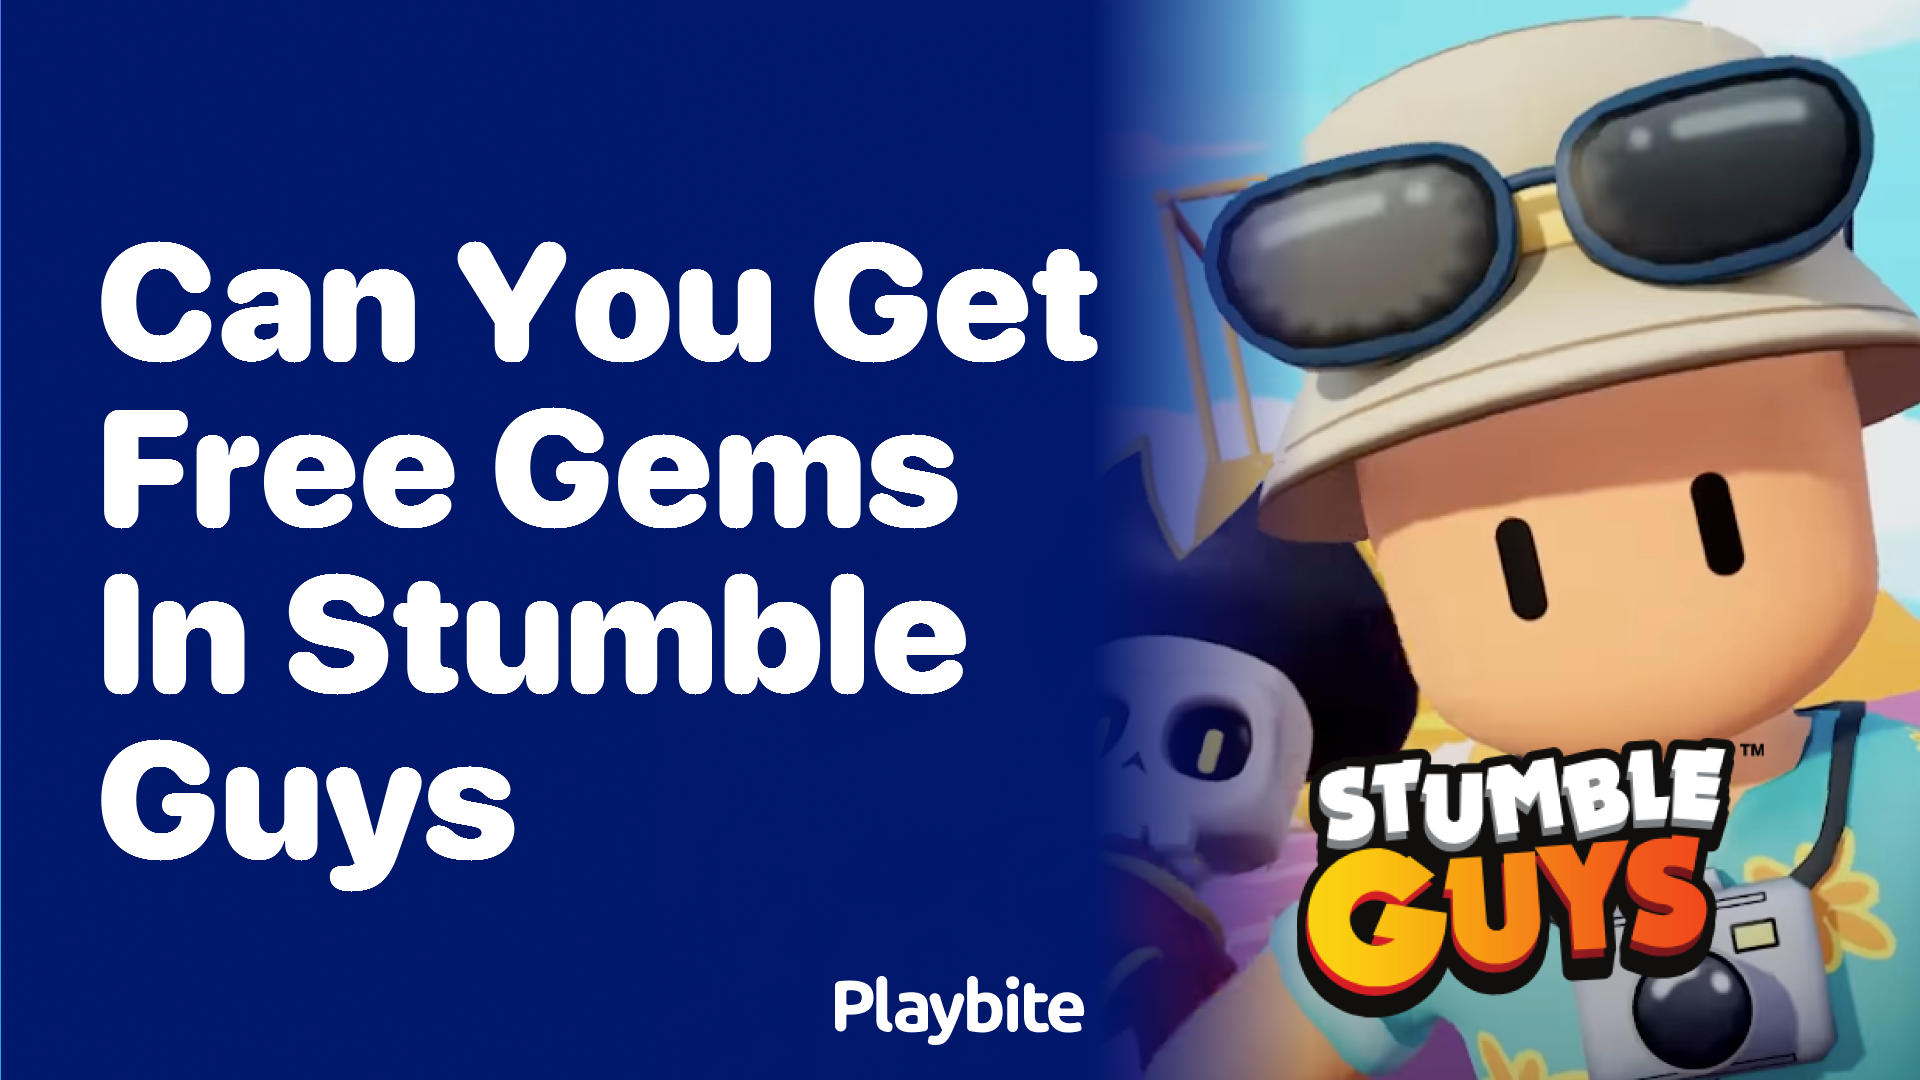 Can You Get Free Gems in Stumble Guys?